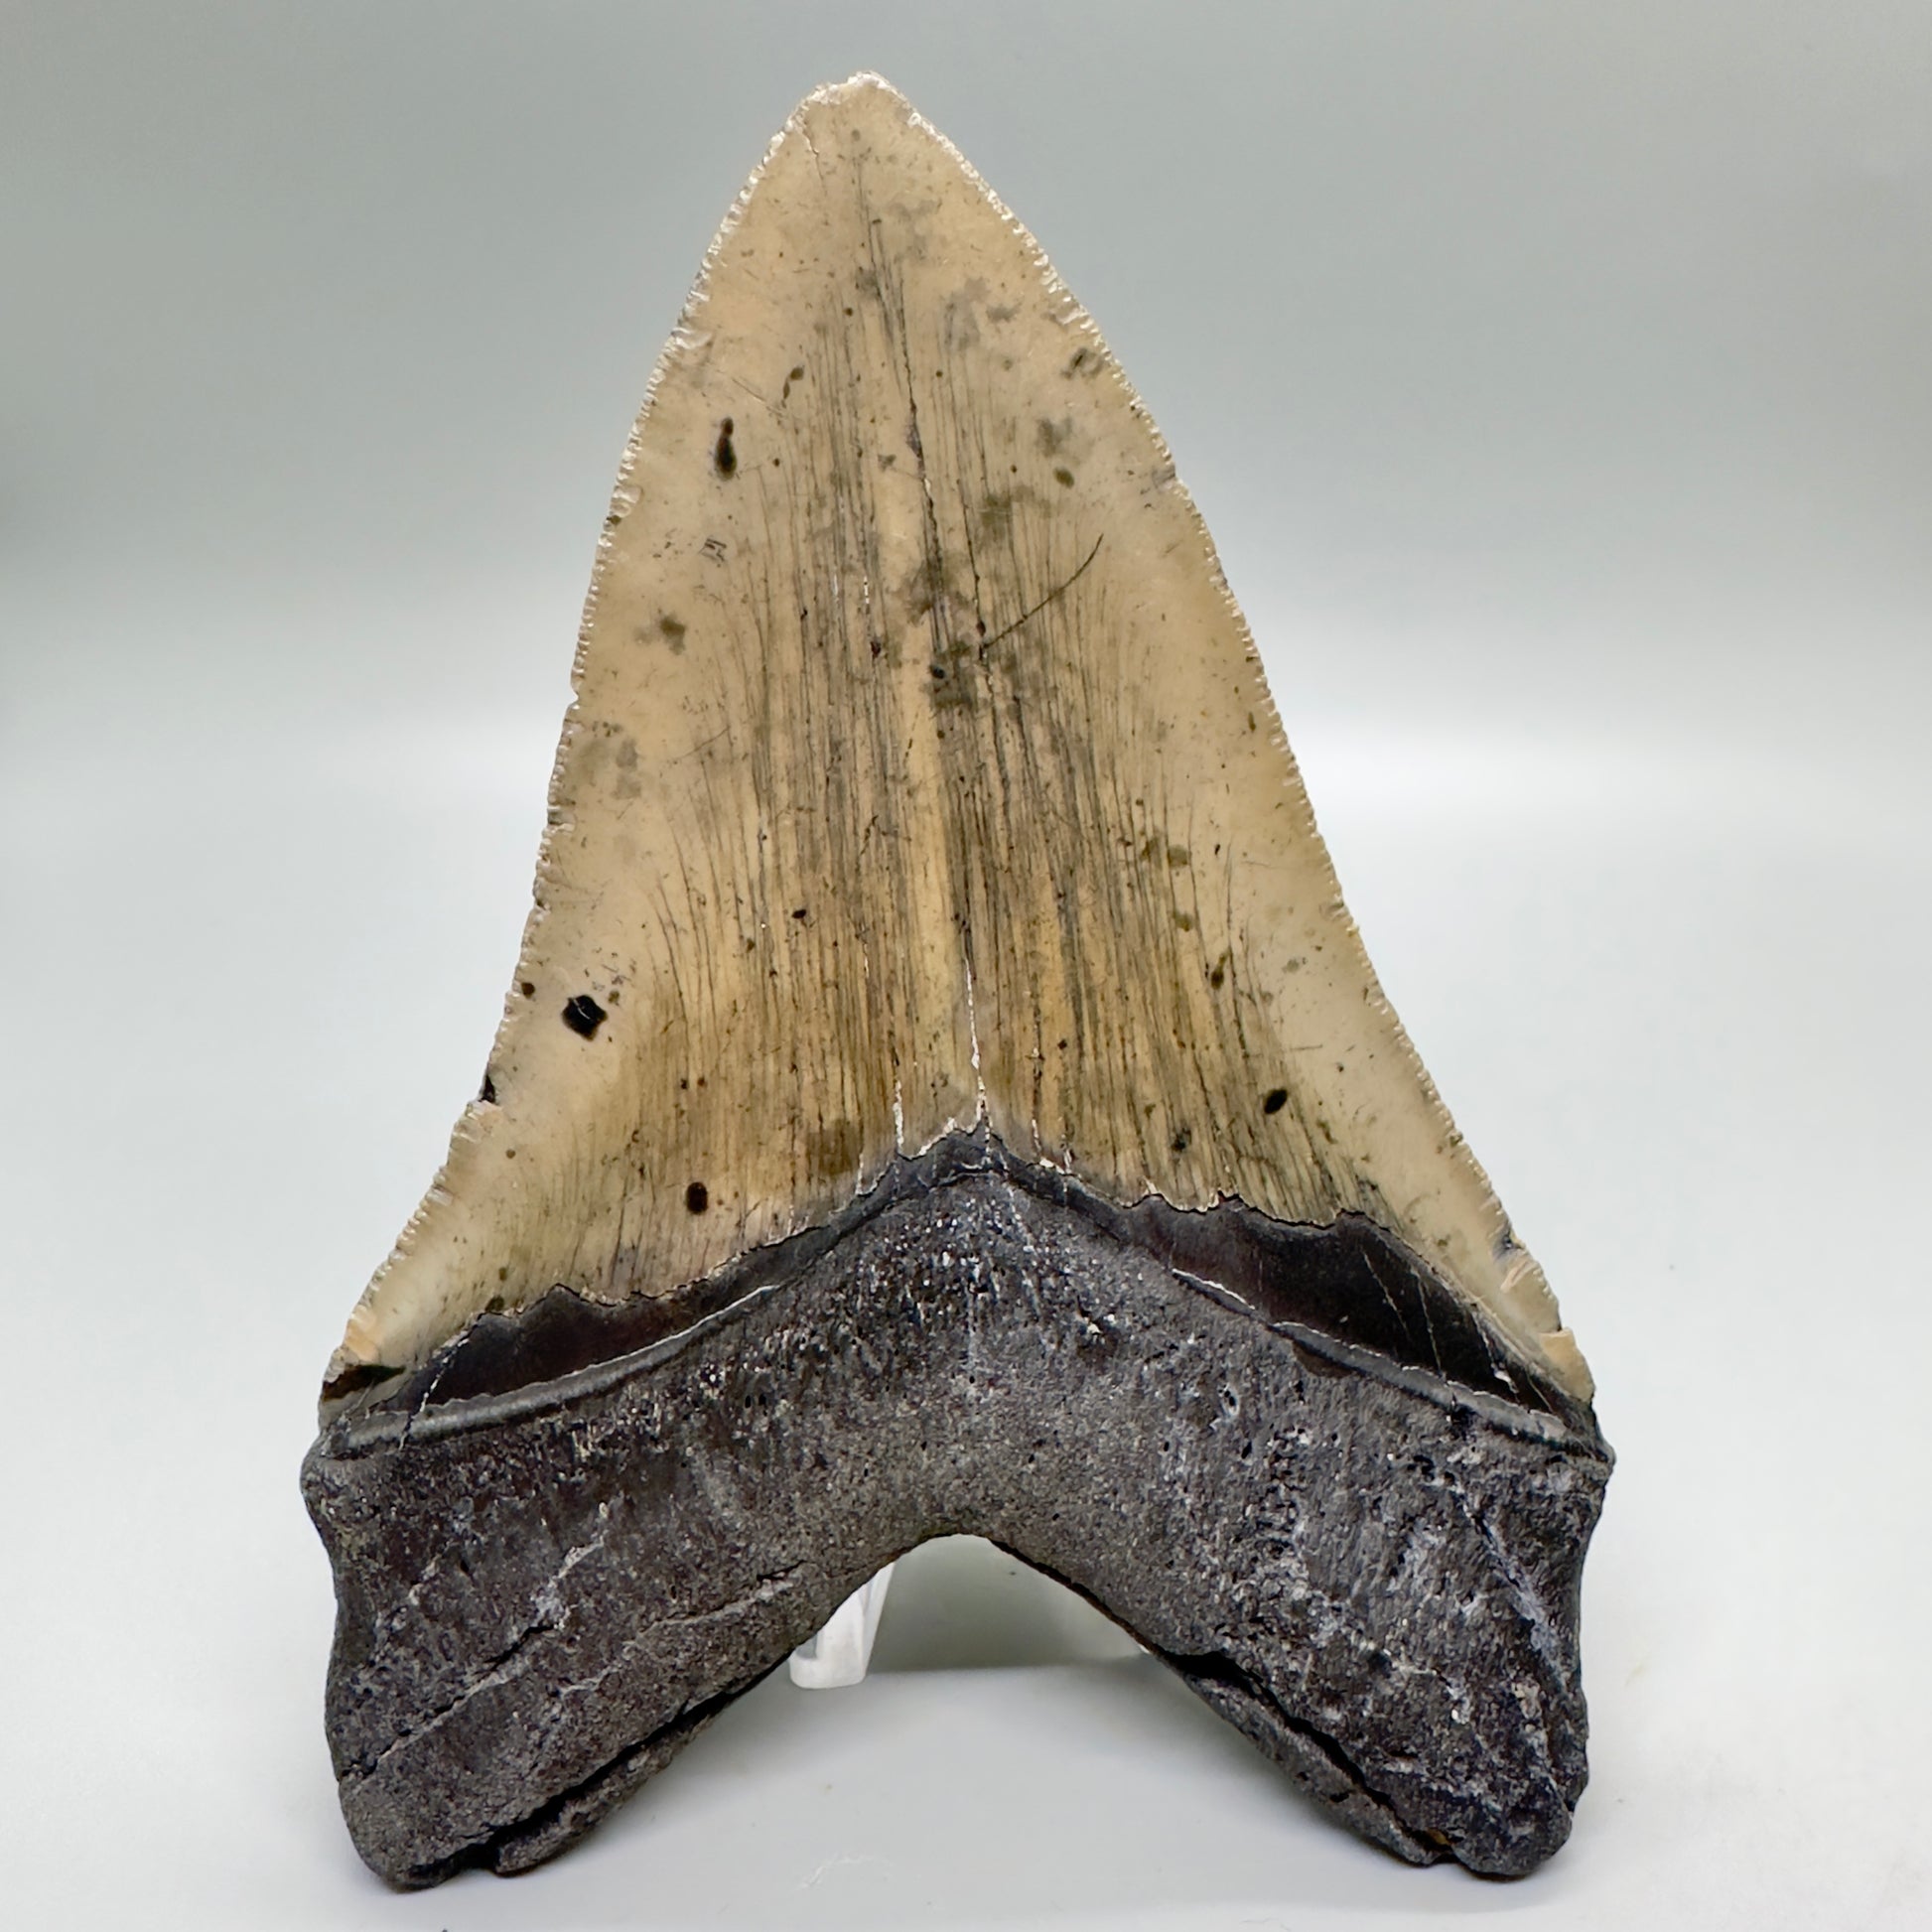 Serrated beauty 5.64" Fossil Megalodon Tooth - North Carolina CM4574 - Back